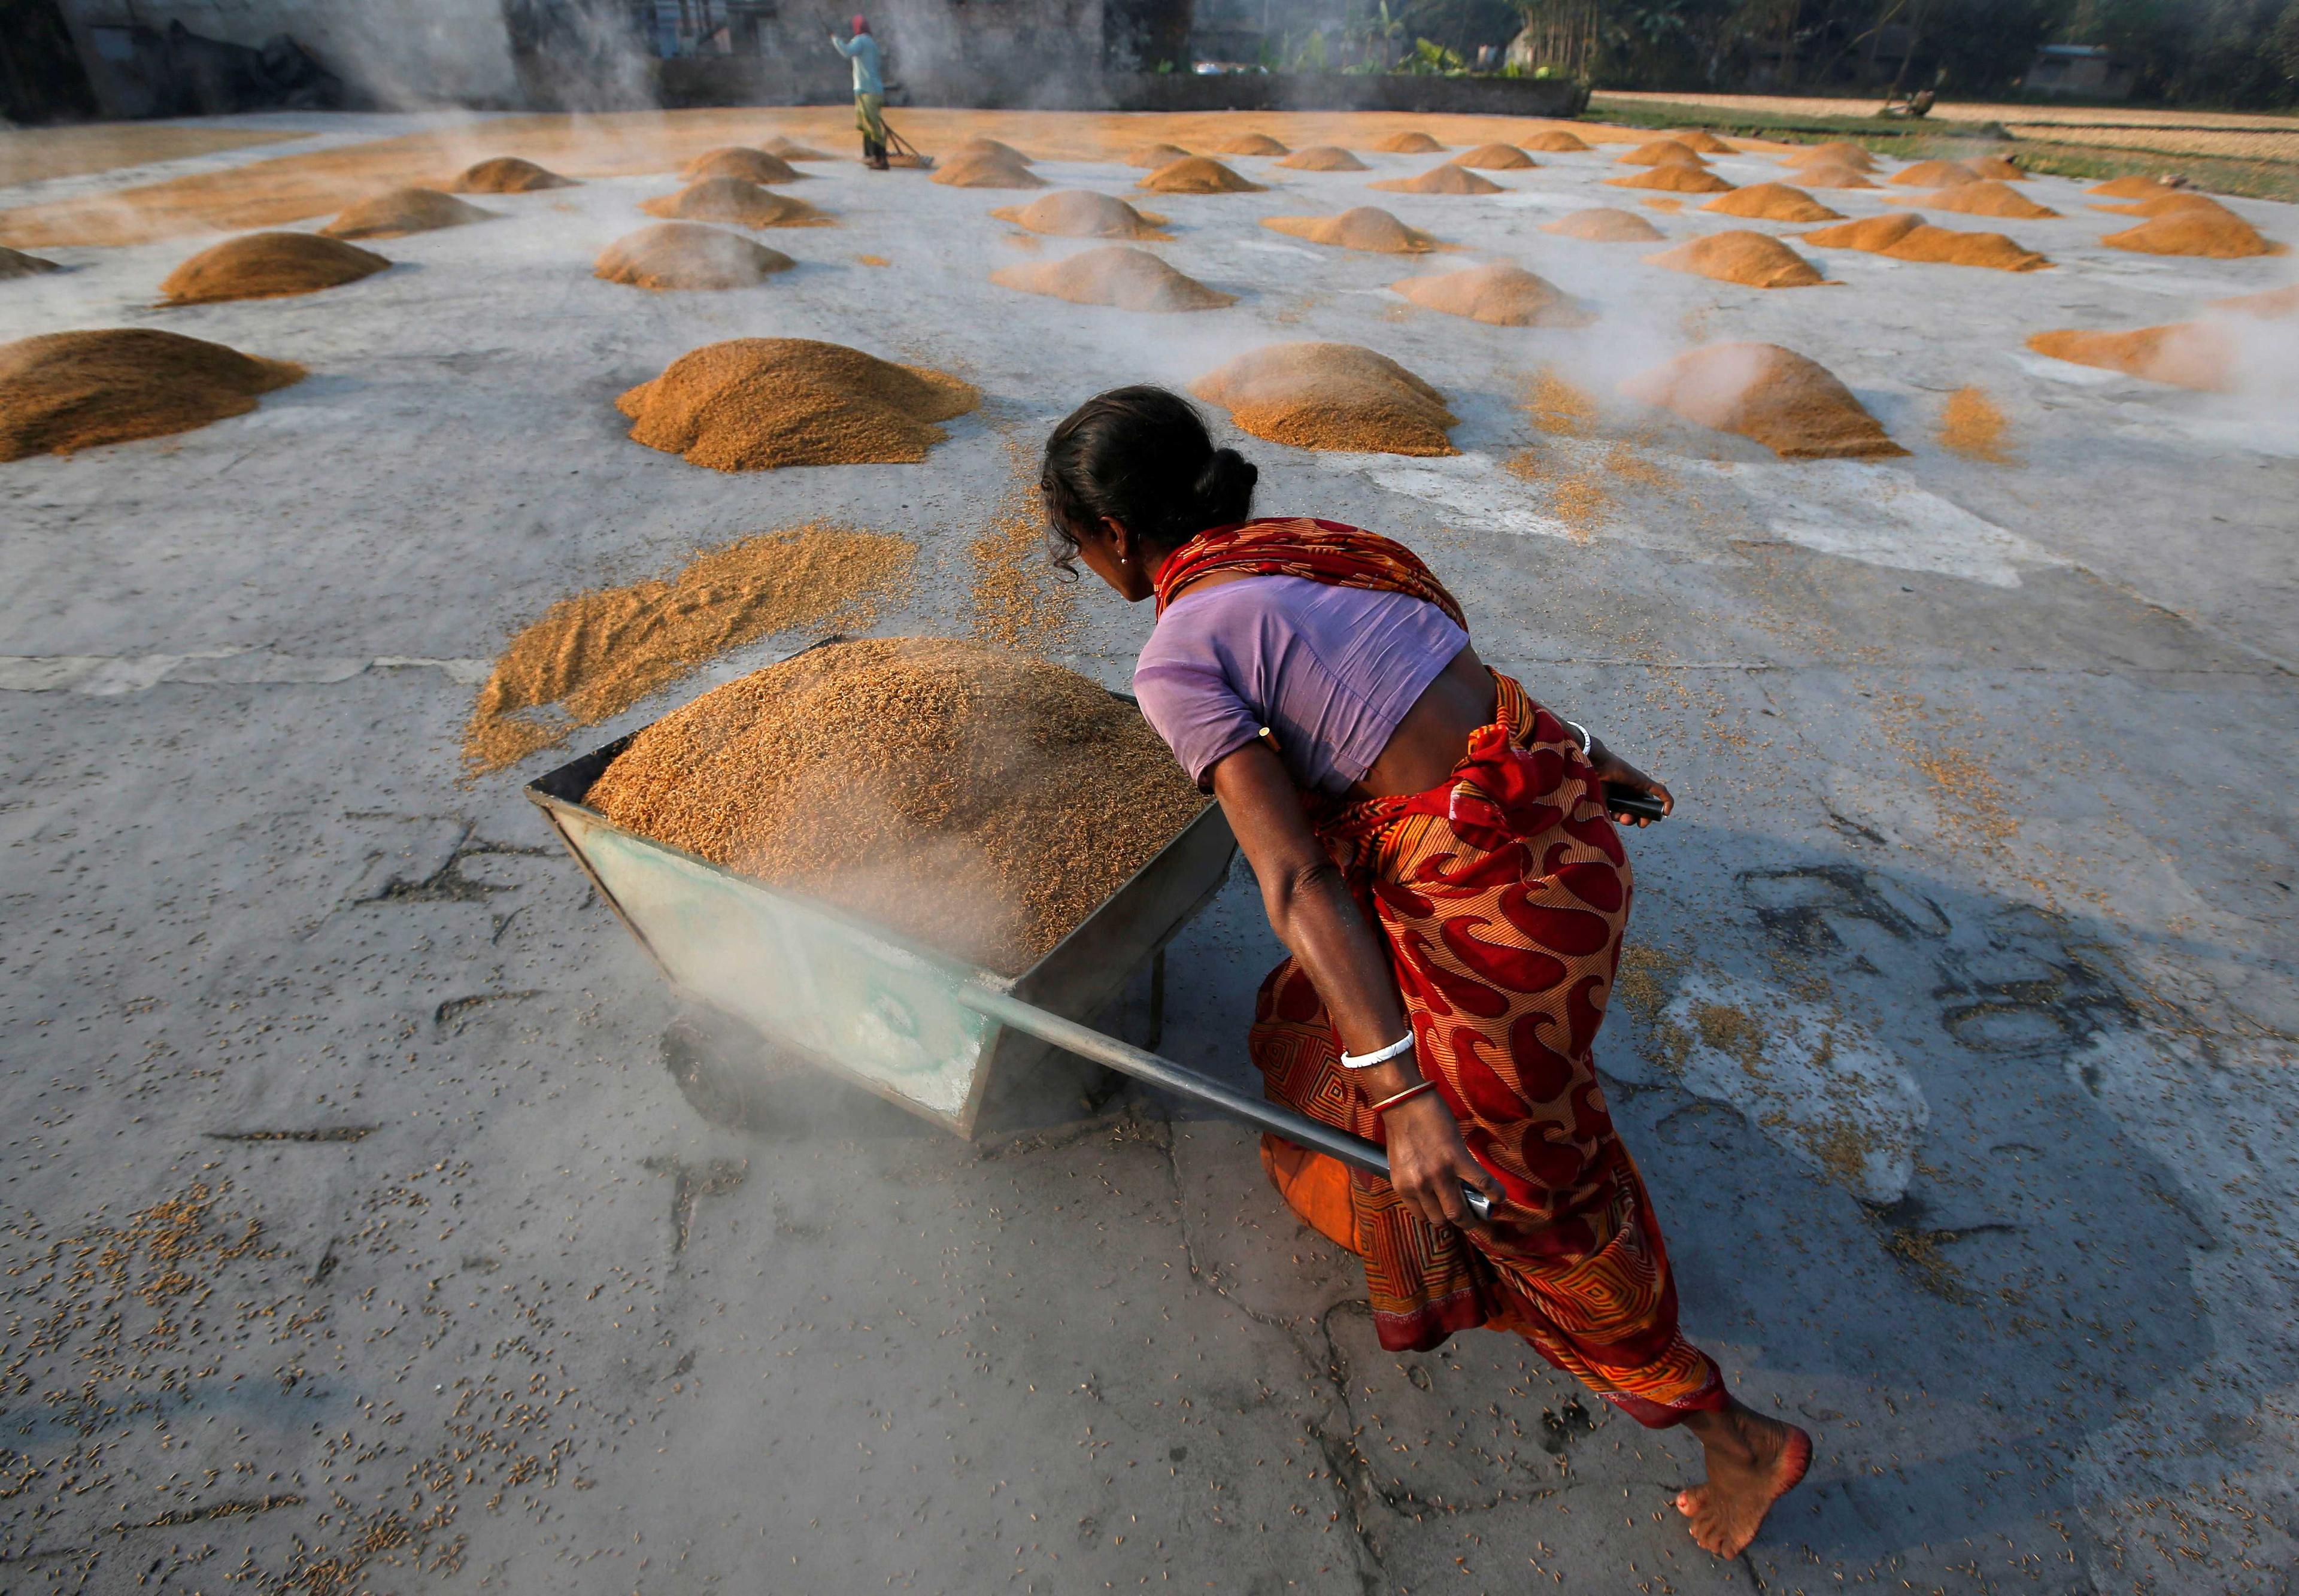 A worker carries boiled rice in a wheelbarrow to spread it for drying at a rice mill on the outskirts of Kolkata, India, Jan 31, 2019. Photo: Reuters